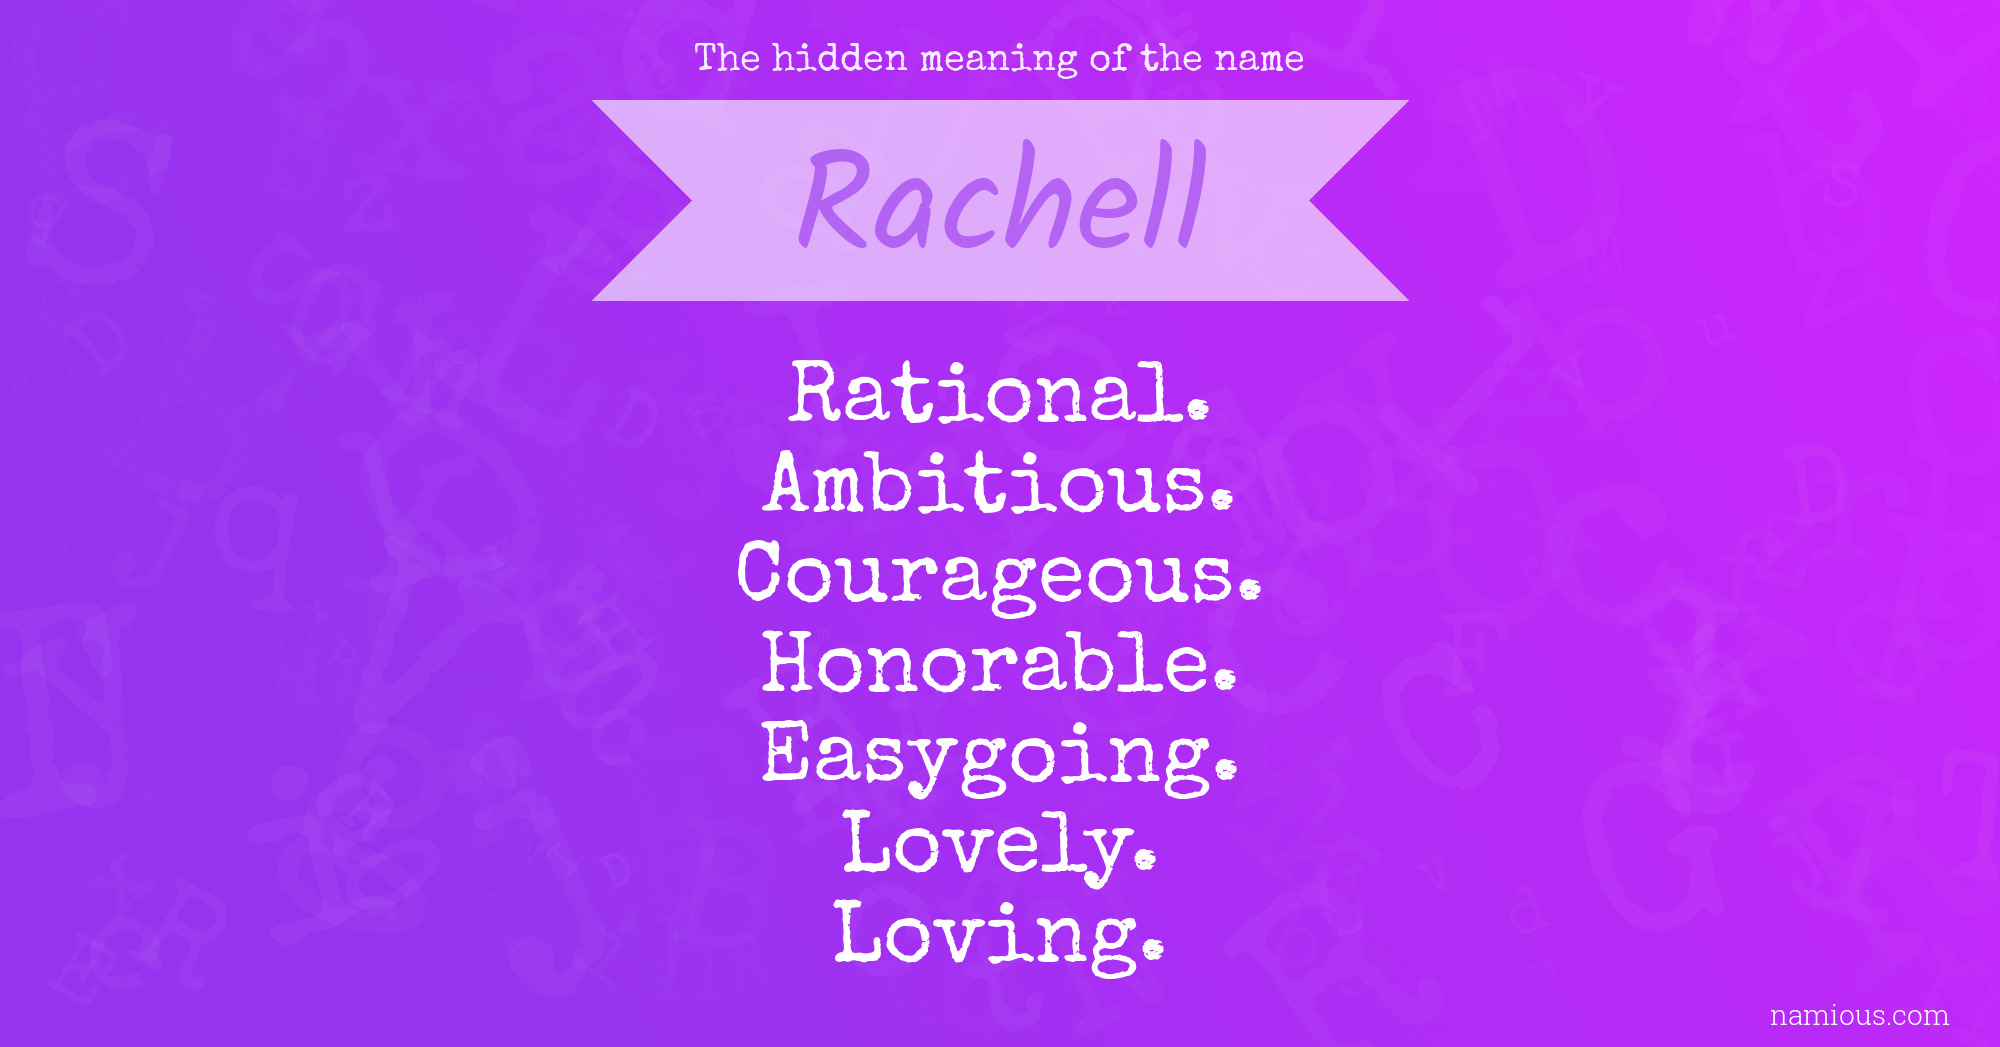 The hidden meaning of the name Rachell